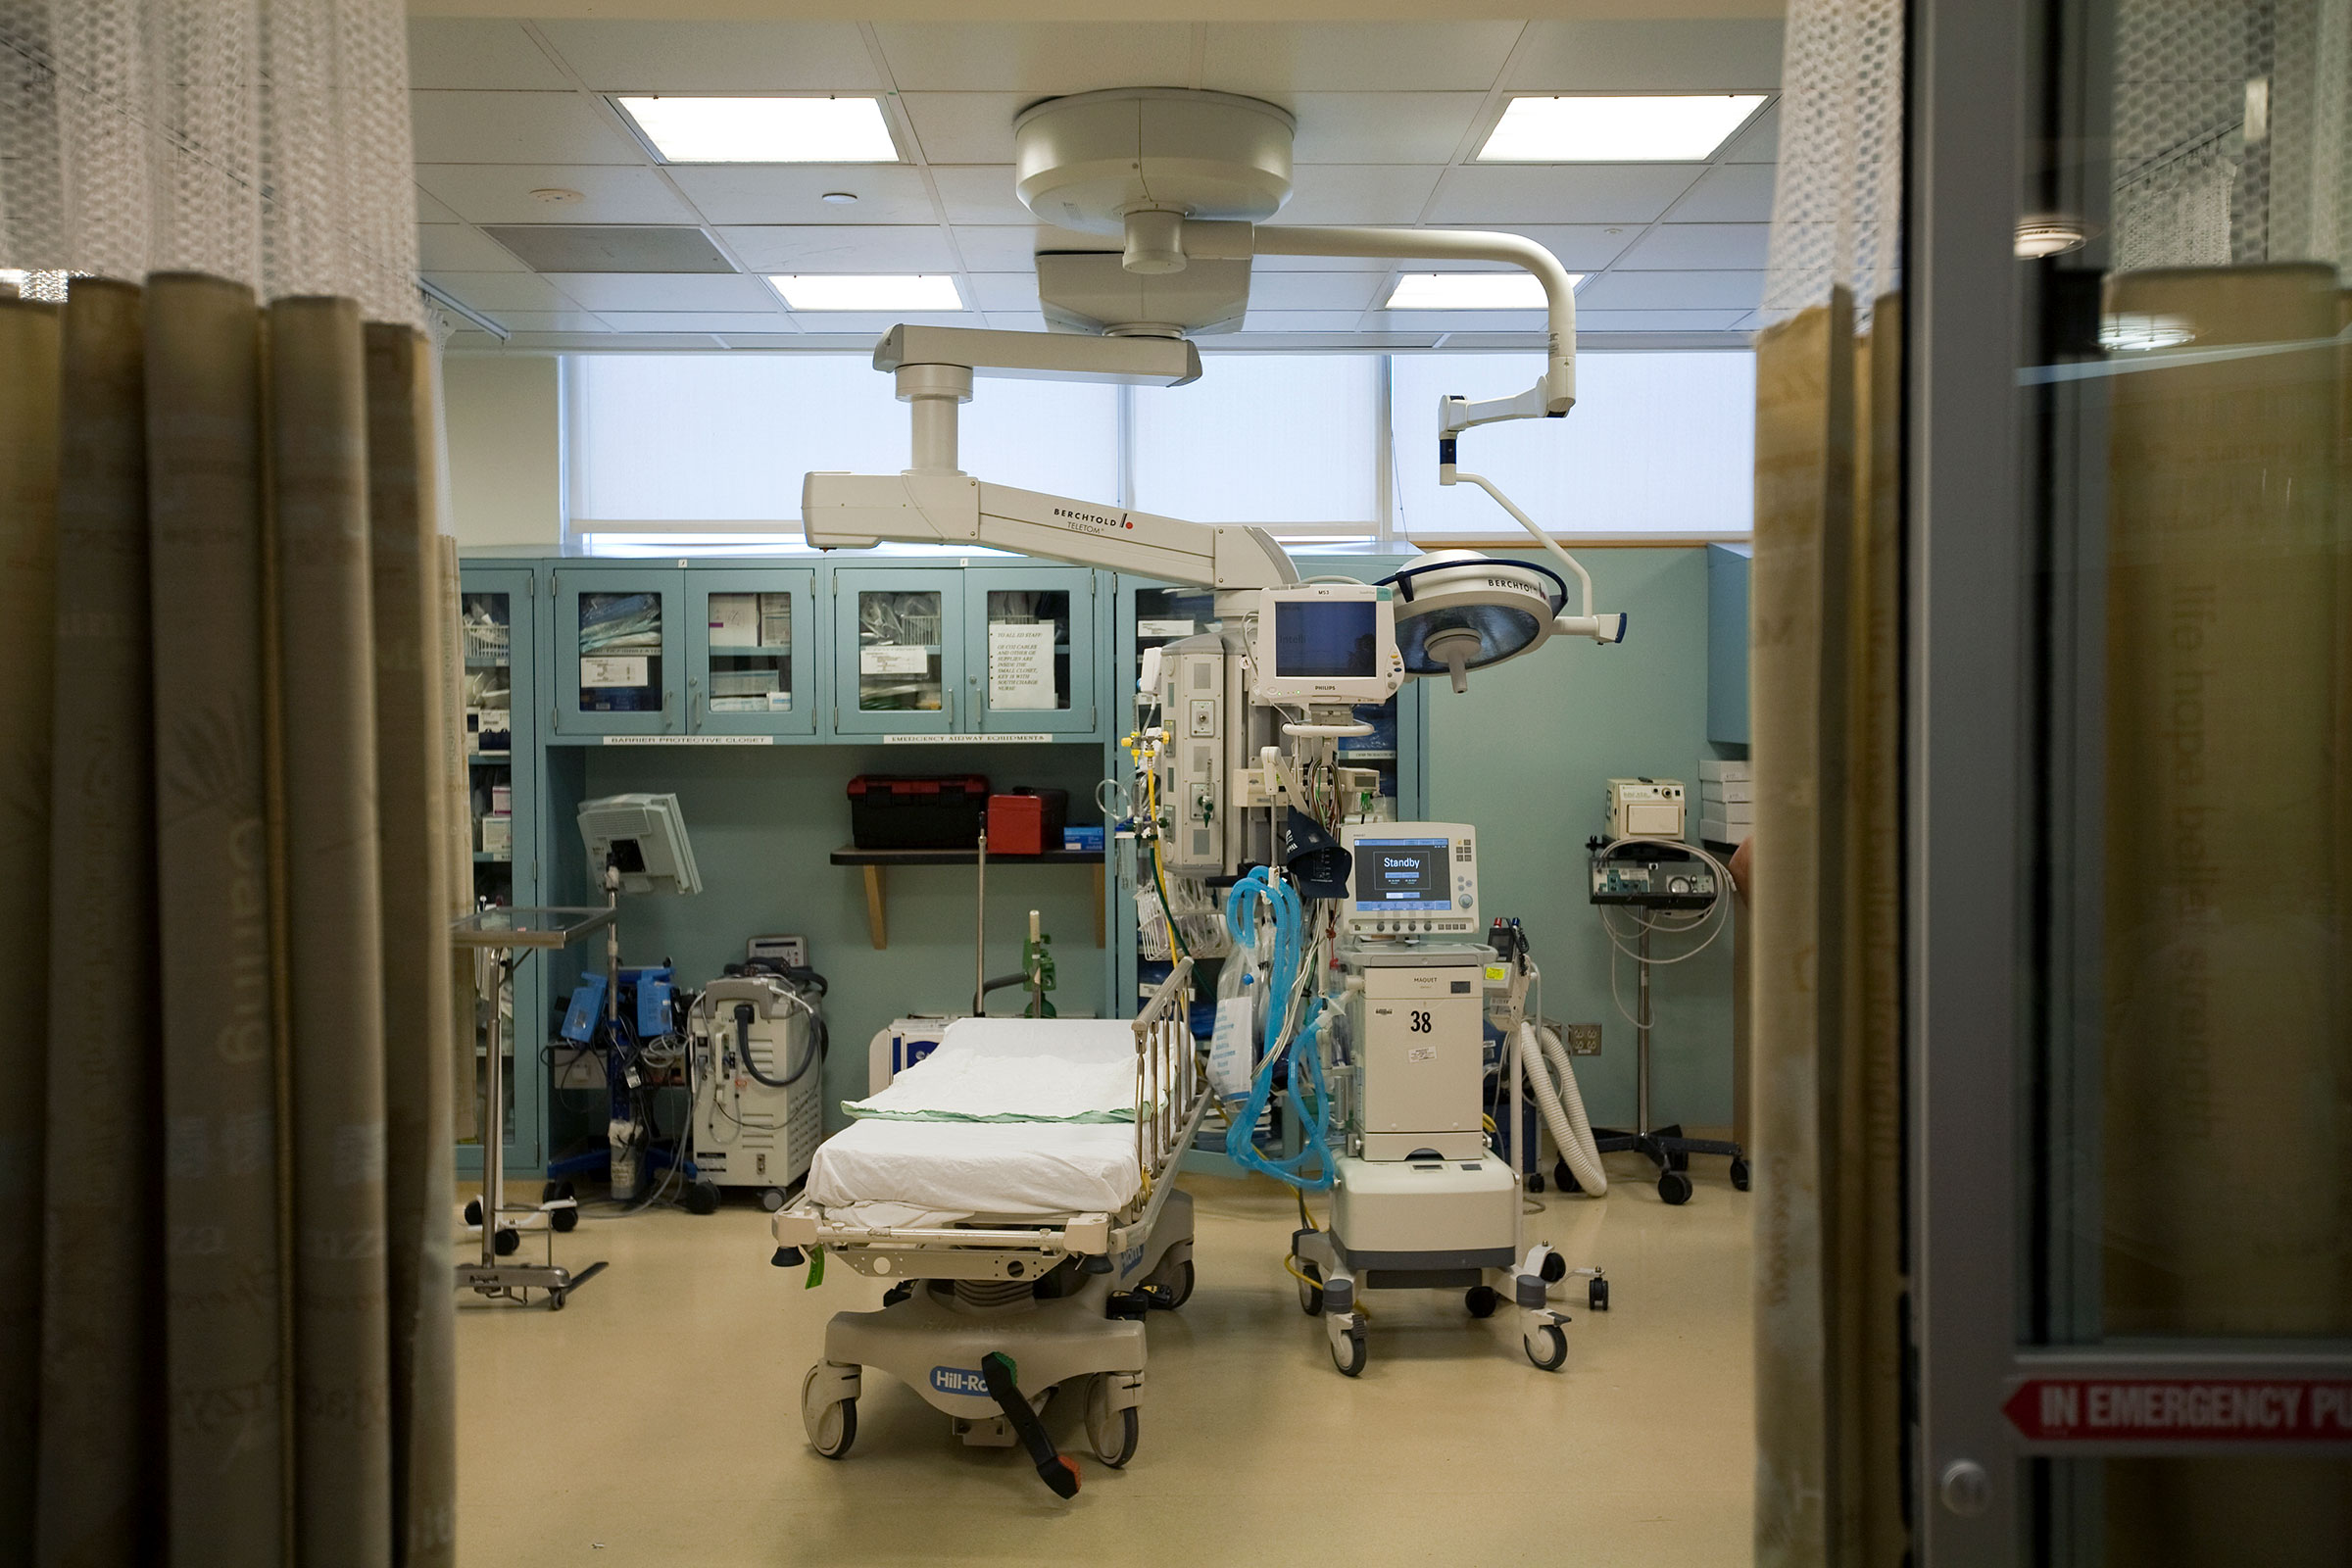 An operating theatre for trauma and cardiac arrests, among other urgent emergencies. (Ashley Gilbertson —Redux/VII)